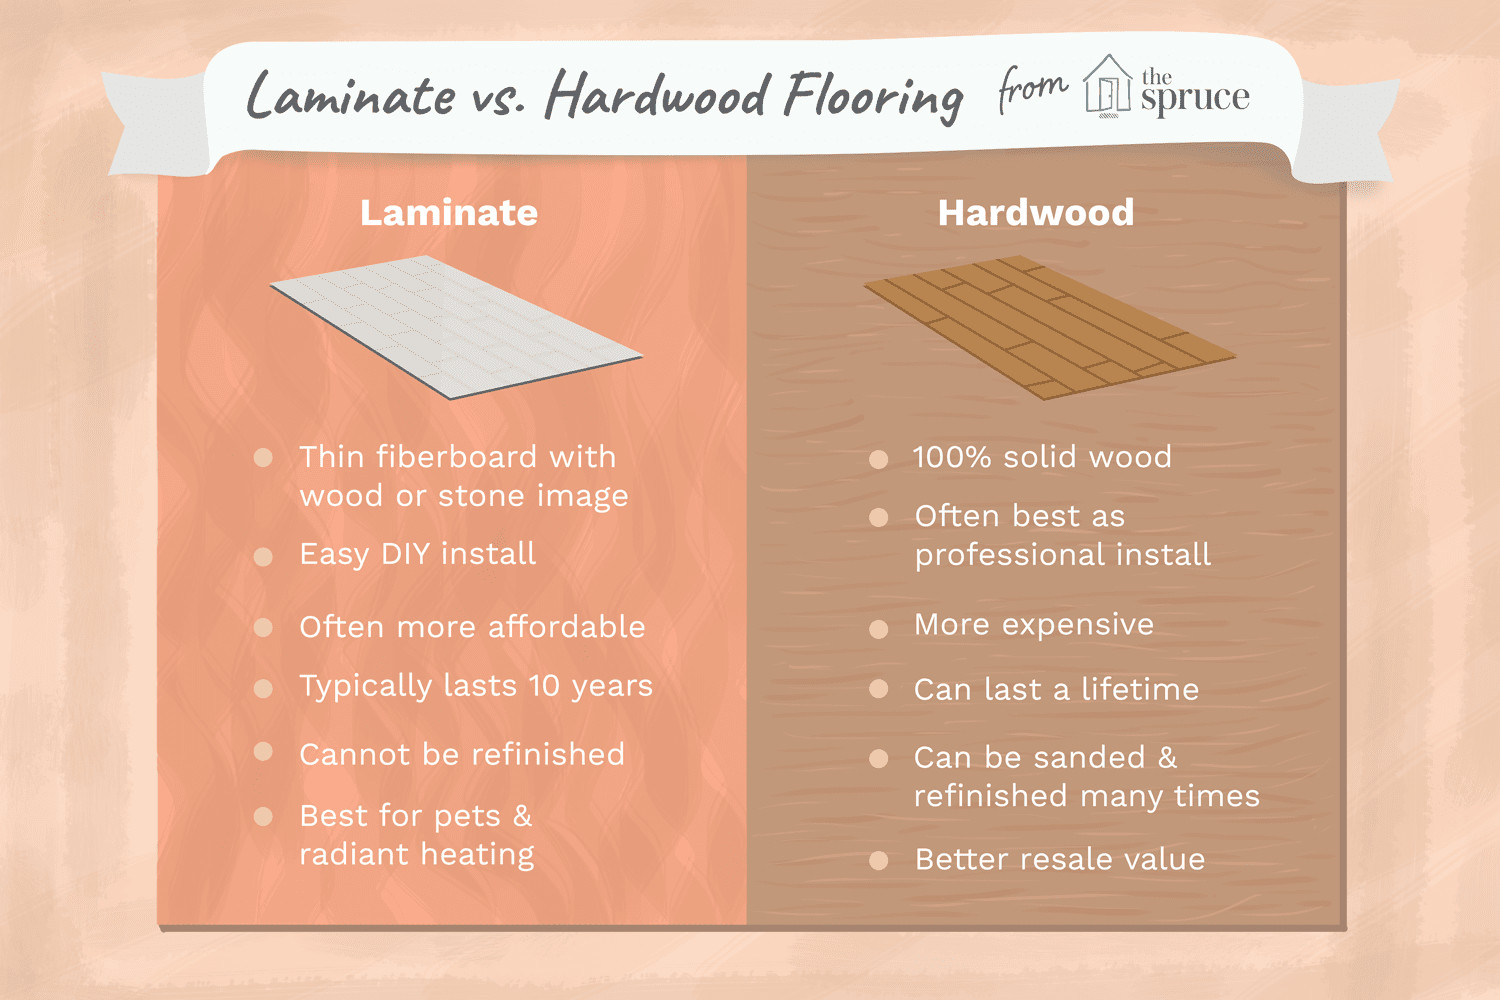 19 Fabulous Cost Of Hardwood Floors Compared to Carpet 2024 free download cost of hardwood floors compared to carpet of laminate vs hardwood doesnt have to be a hard decision pertaining to laminate vs hardwood flooring how they compare 1821870 final 5bae84f24cedfd